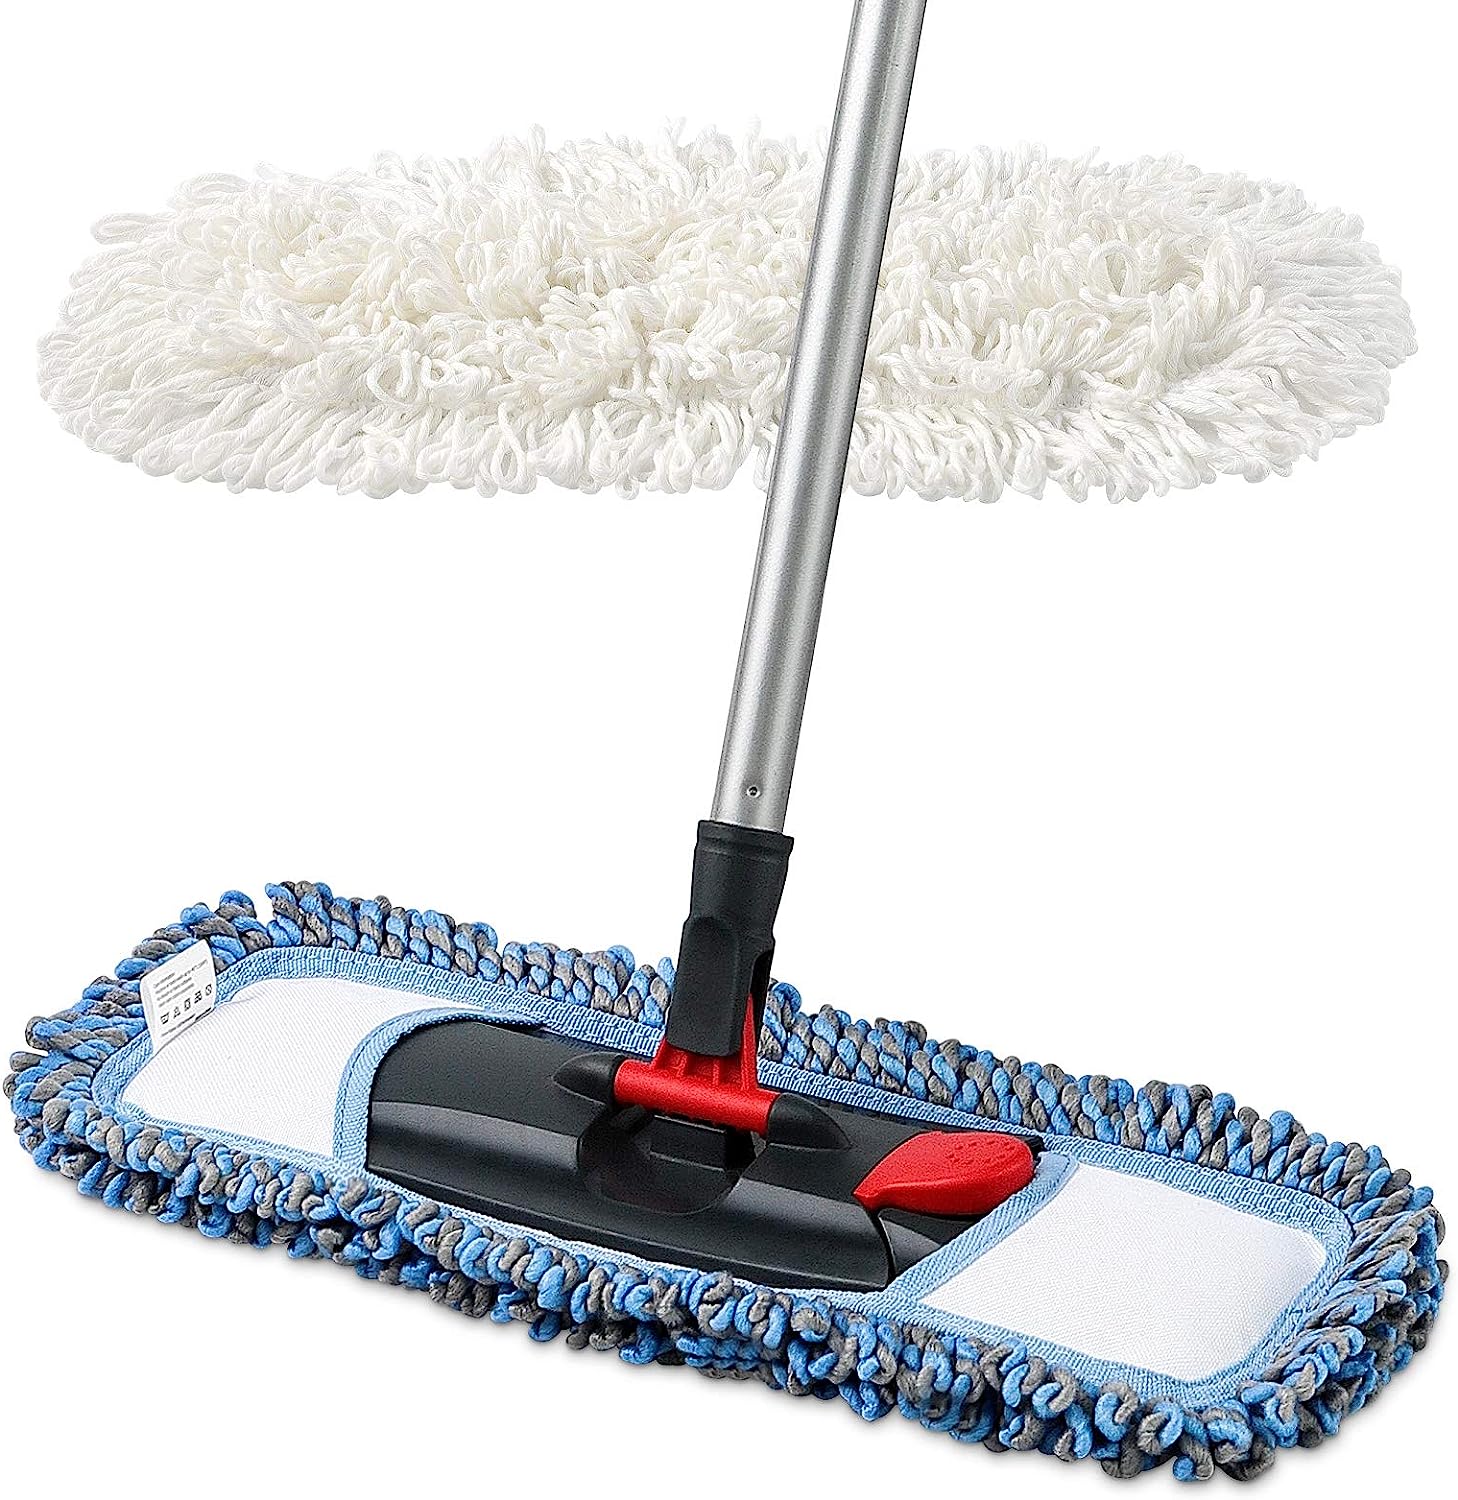 CLEANHOME Dust Mop for Floor Cleaning Microfiber [...]